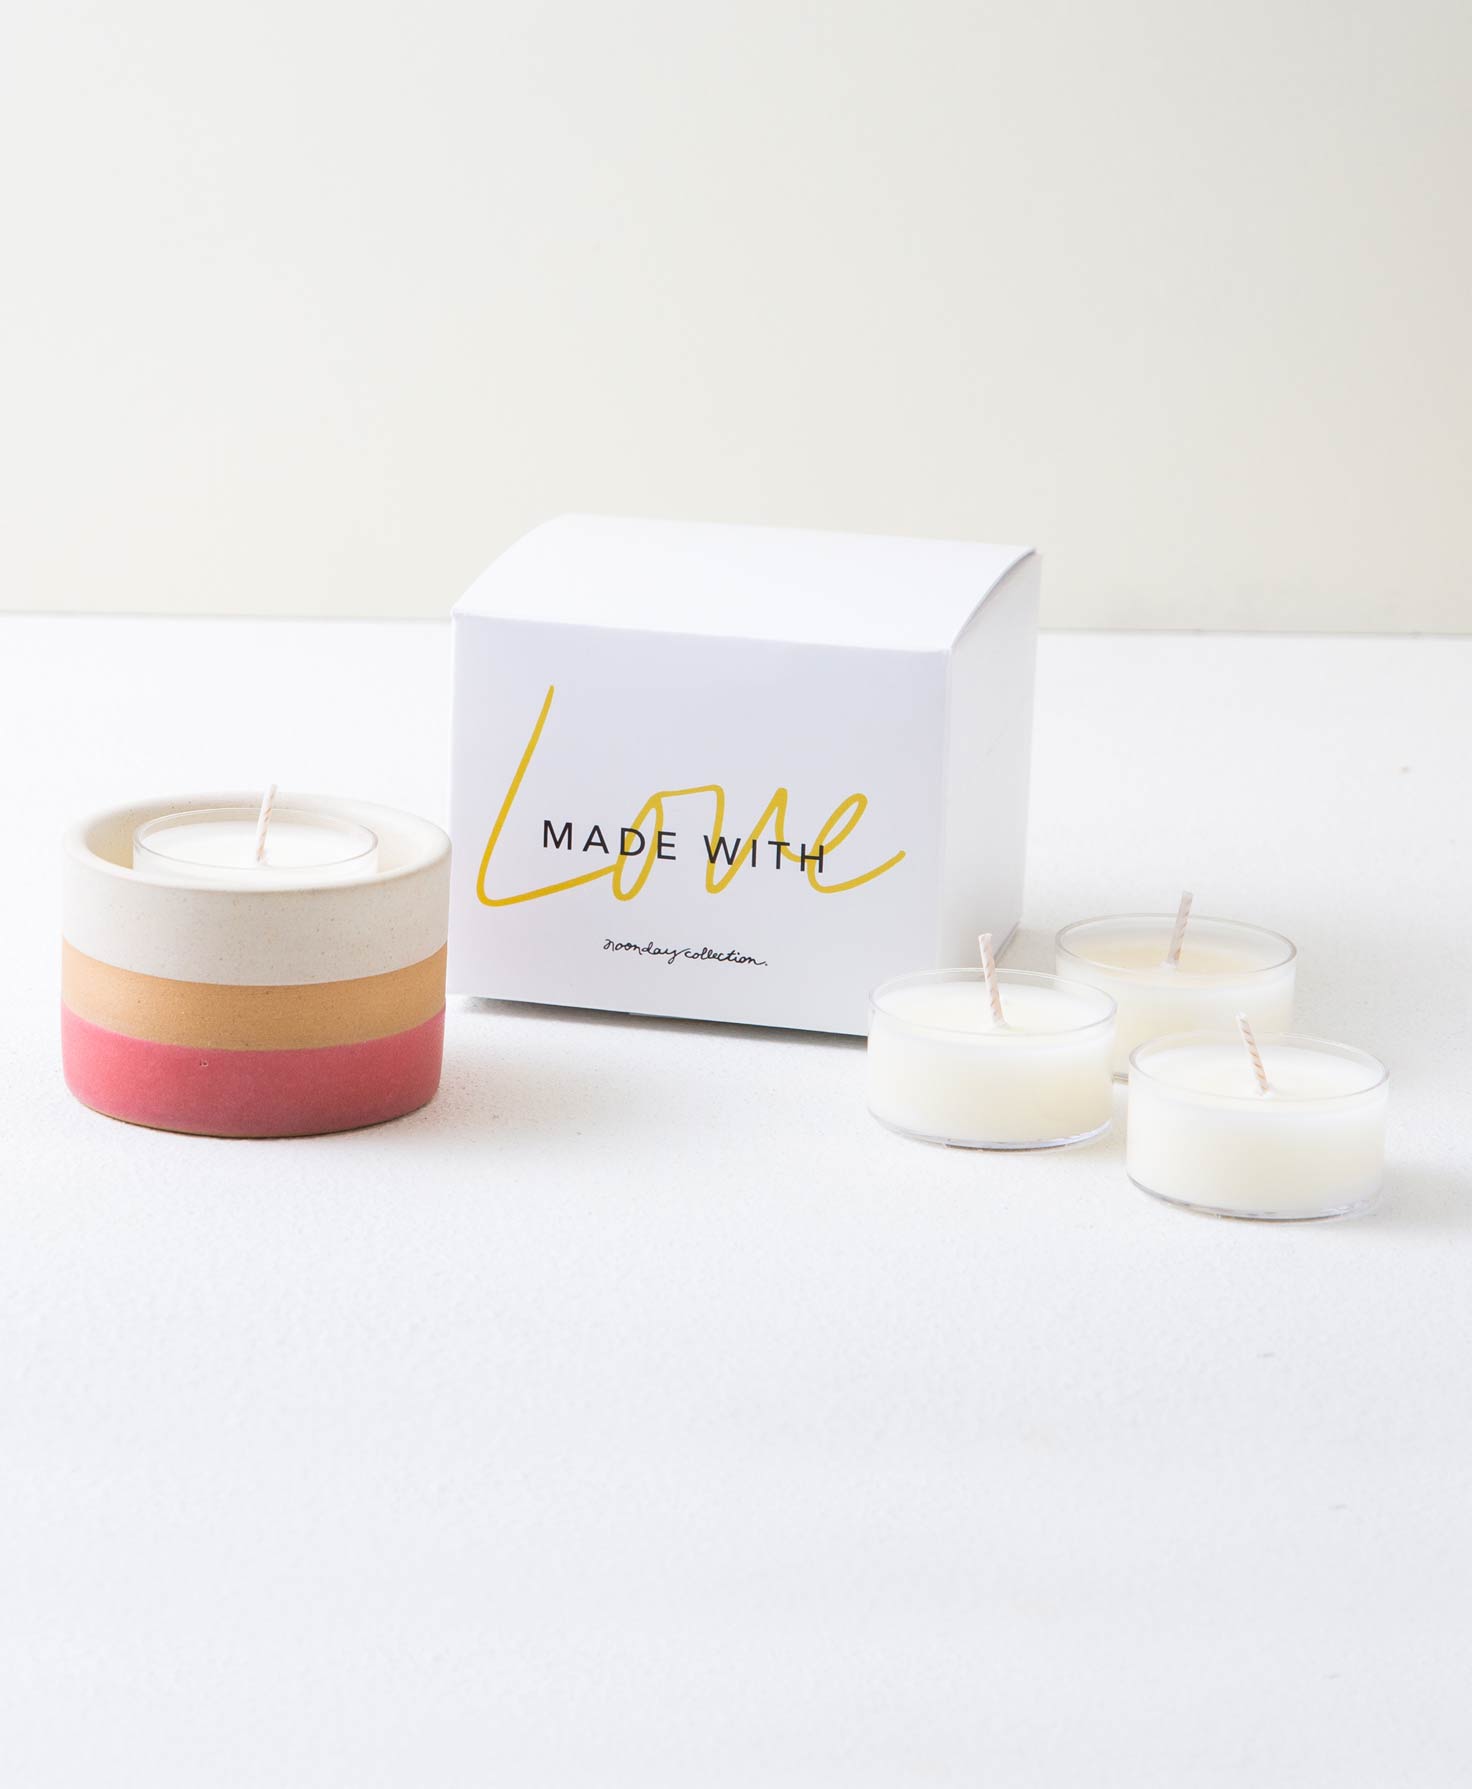 The Banded Stone Tealight Holder in Pink and three white tealight candles sit next to the white box they are packaged in. The box is square and has 